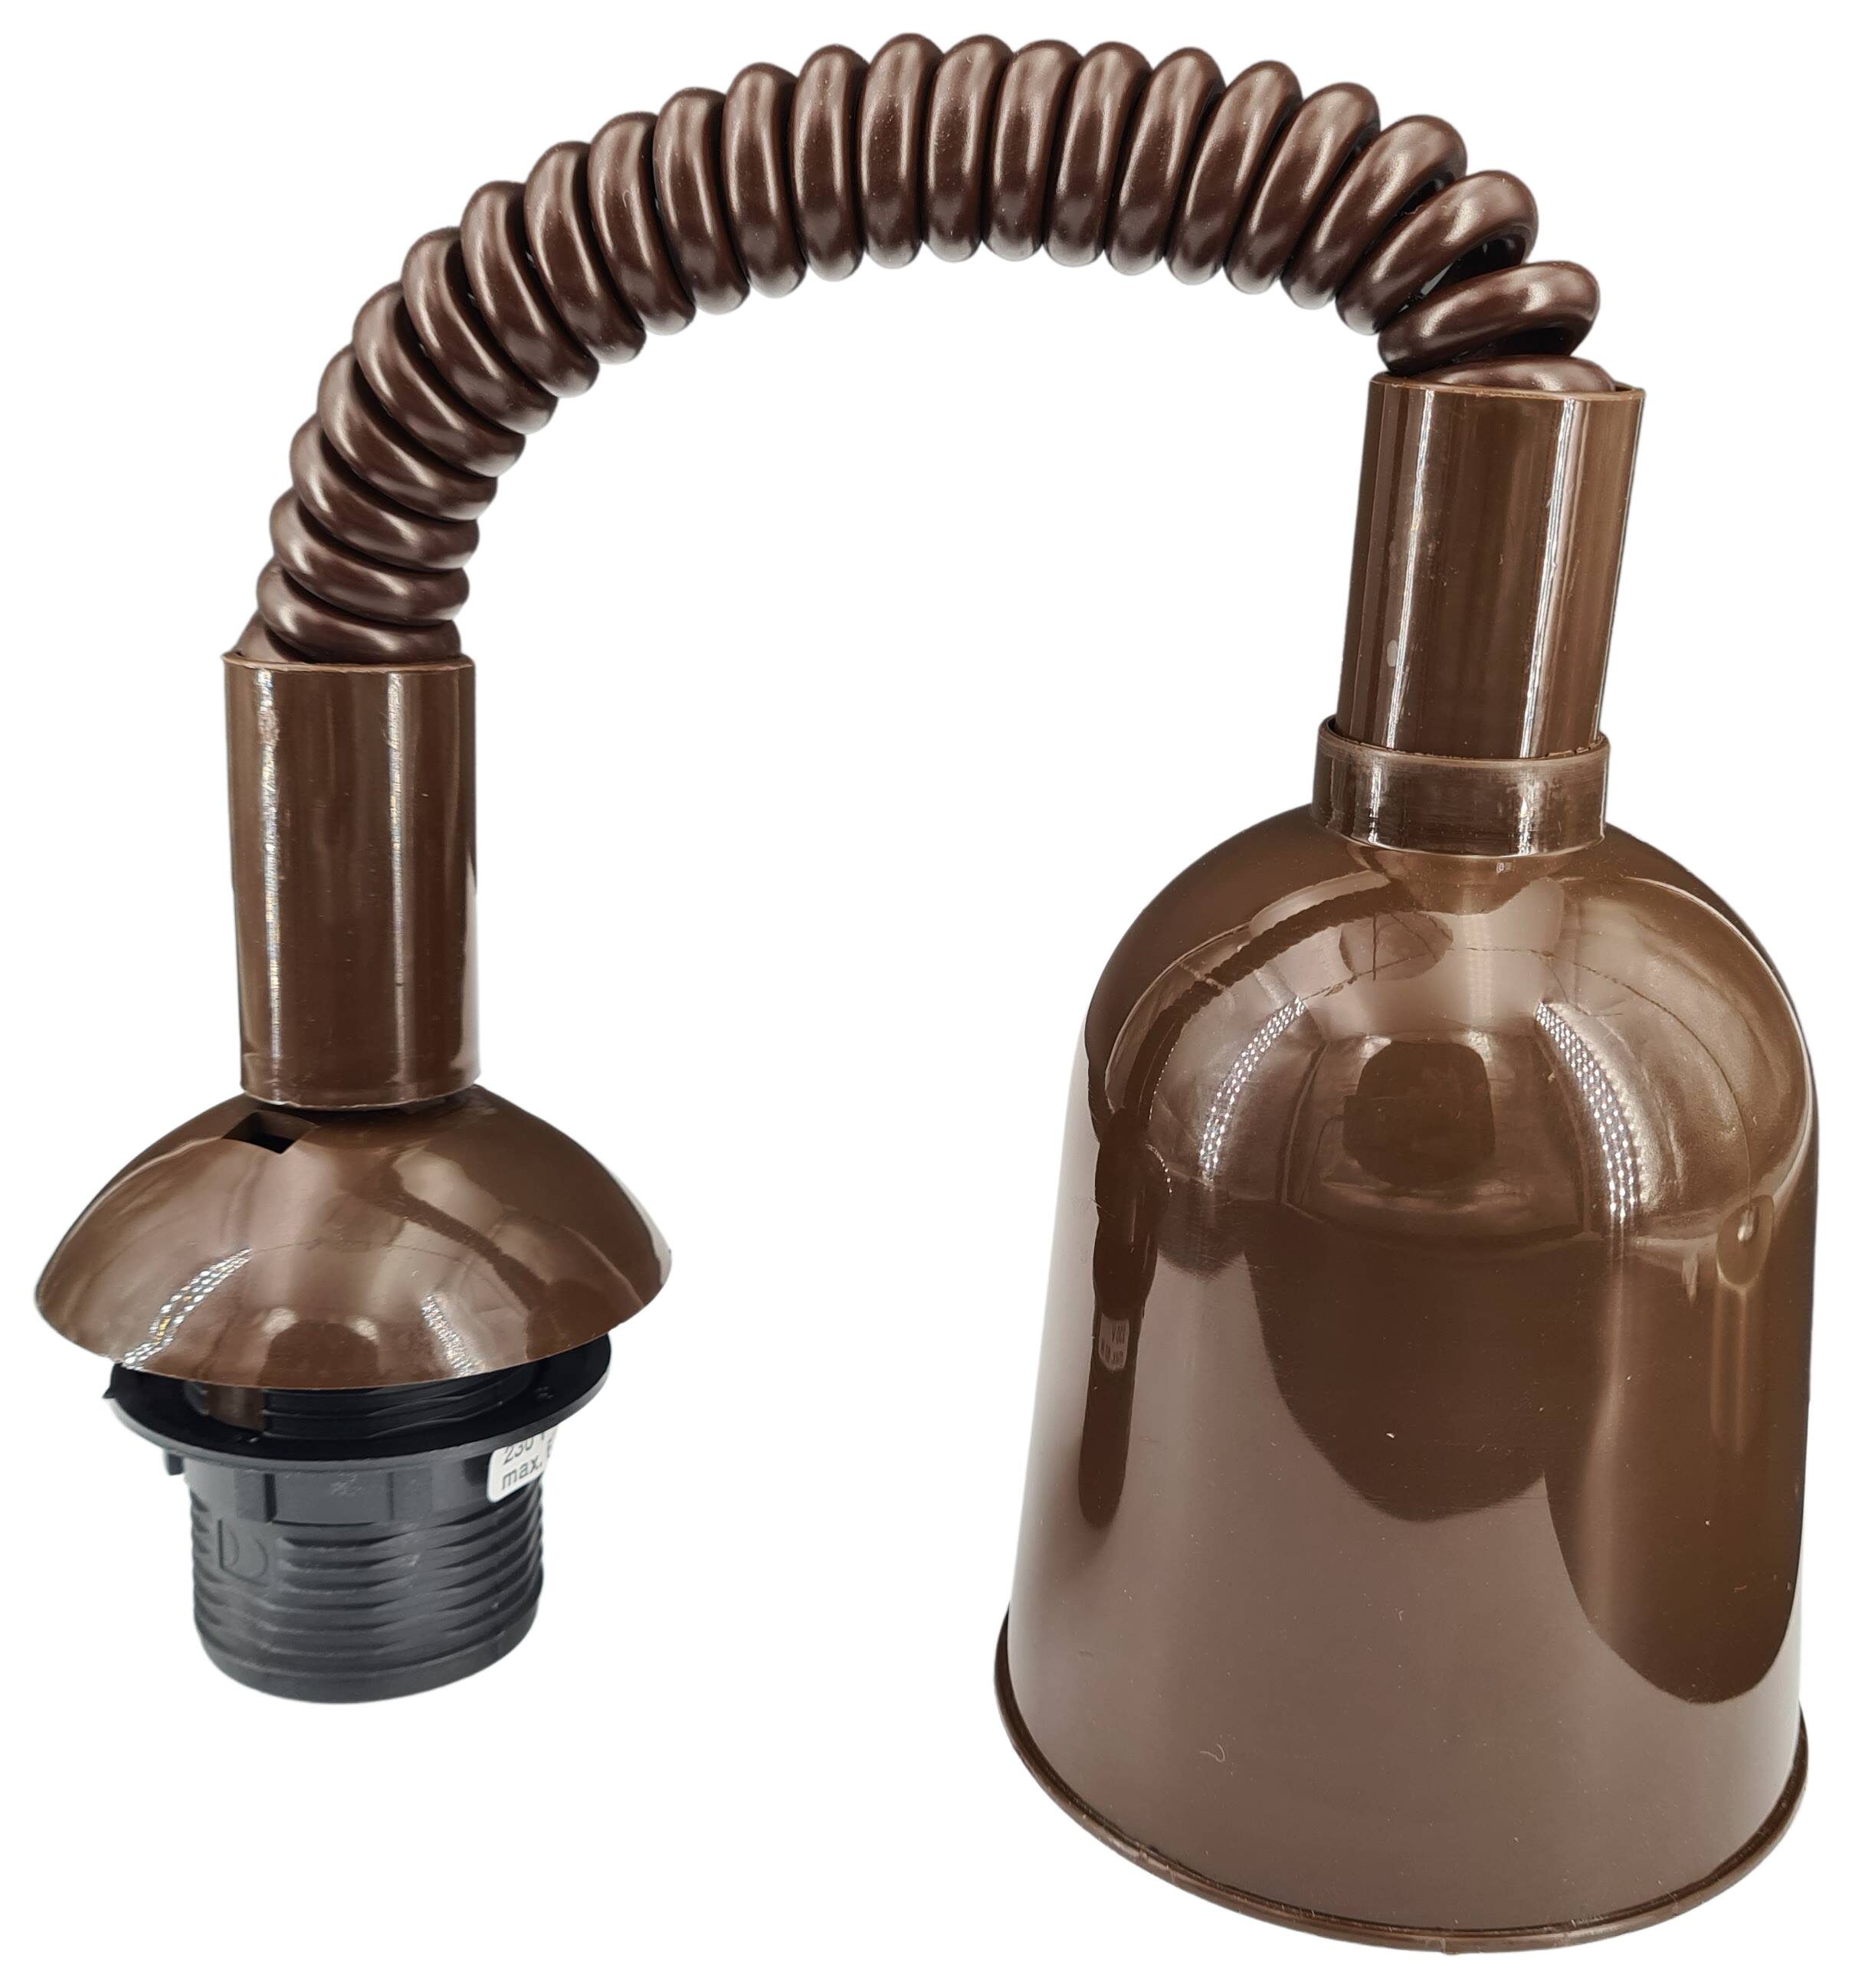 lift 2x0,75 with mounted socket E27 120 cm extendible brown